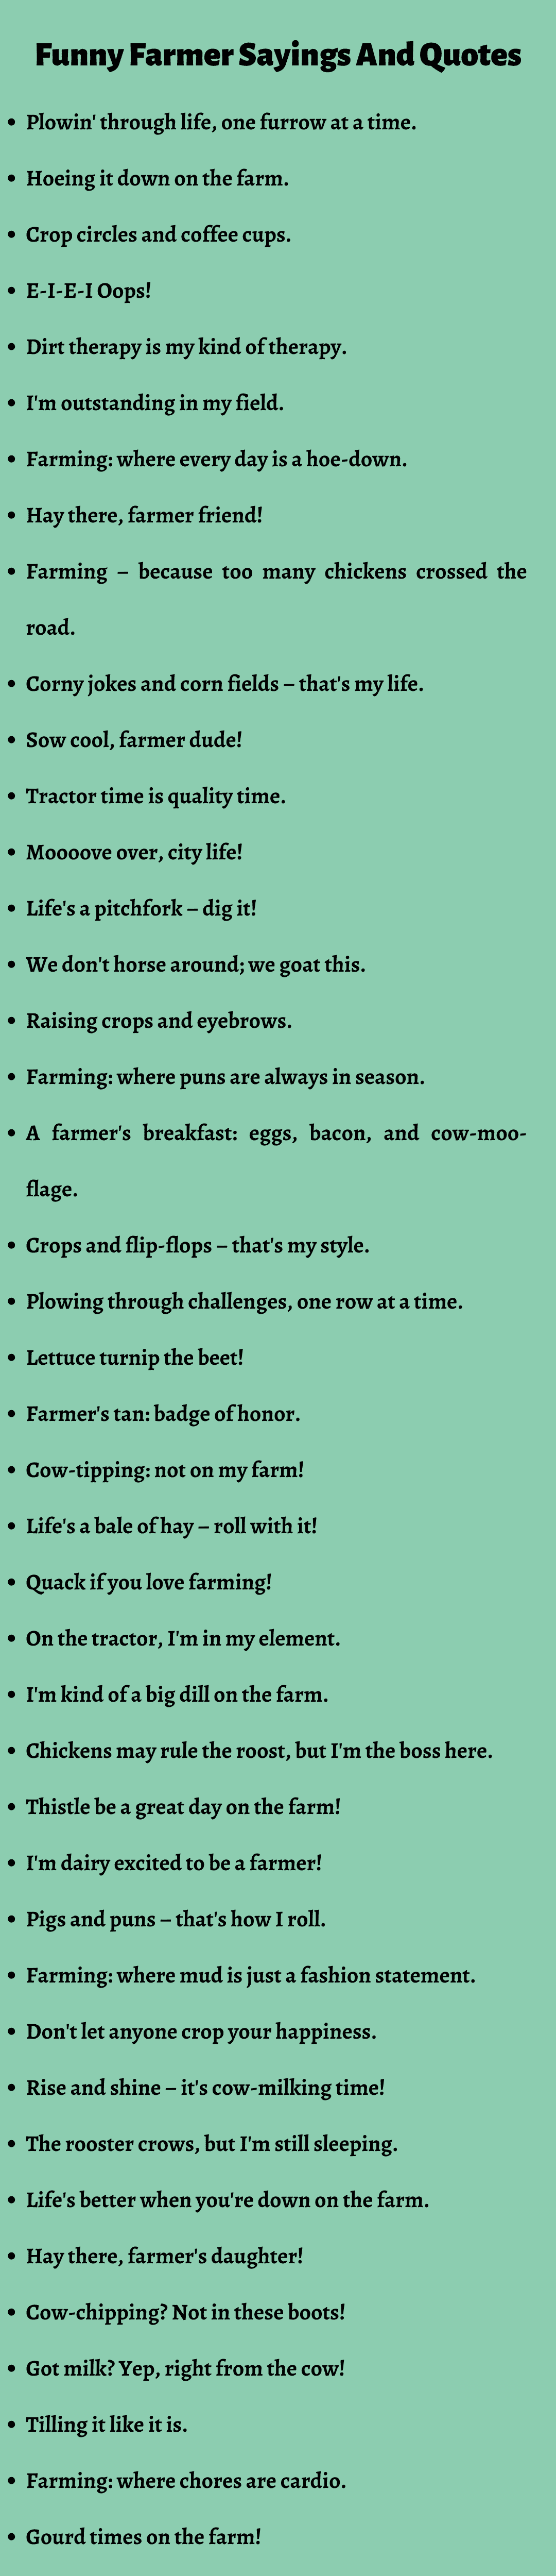 Funny Farmer Sayings And Quotes